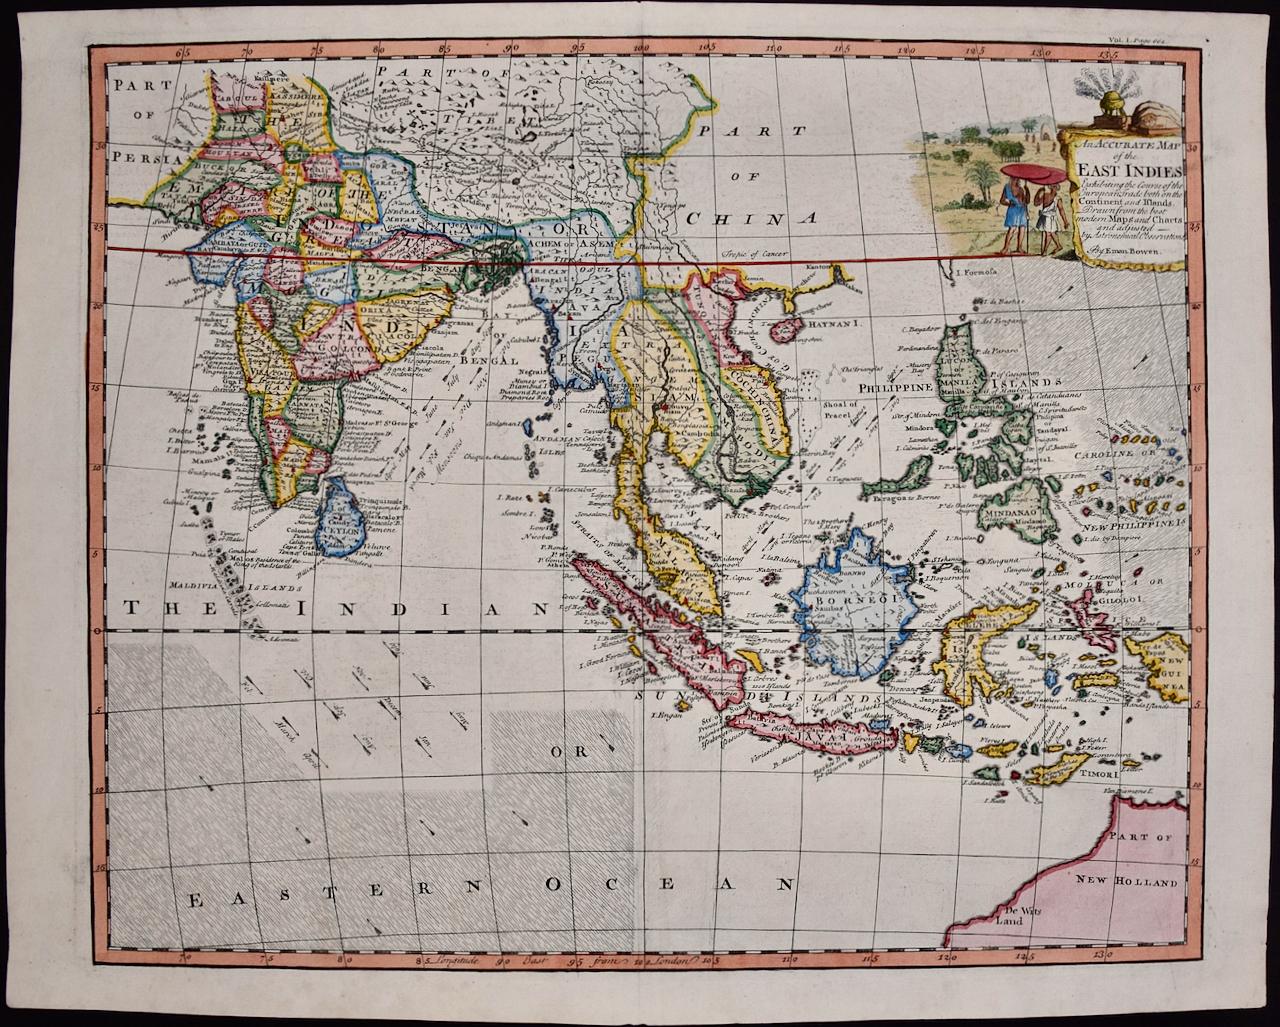 Emanuel Bowen Print - Map of the East Indies: An Original 18th Century Hand-colored Map by E. Bowen